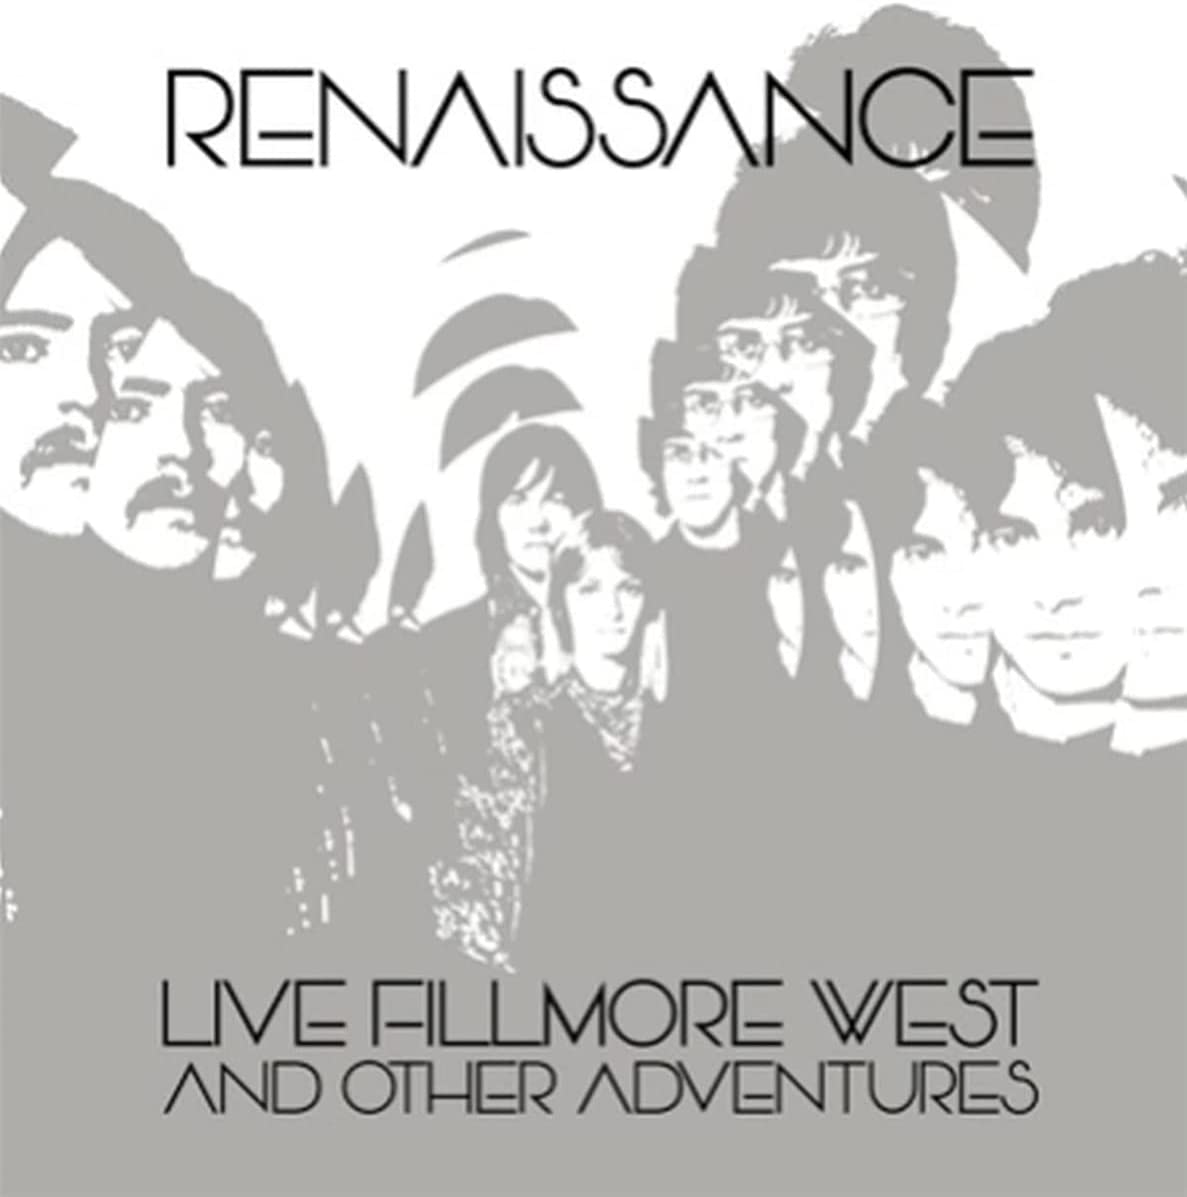 Renaissance_live_fillmore_west_and_other_adventures